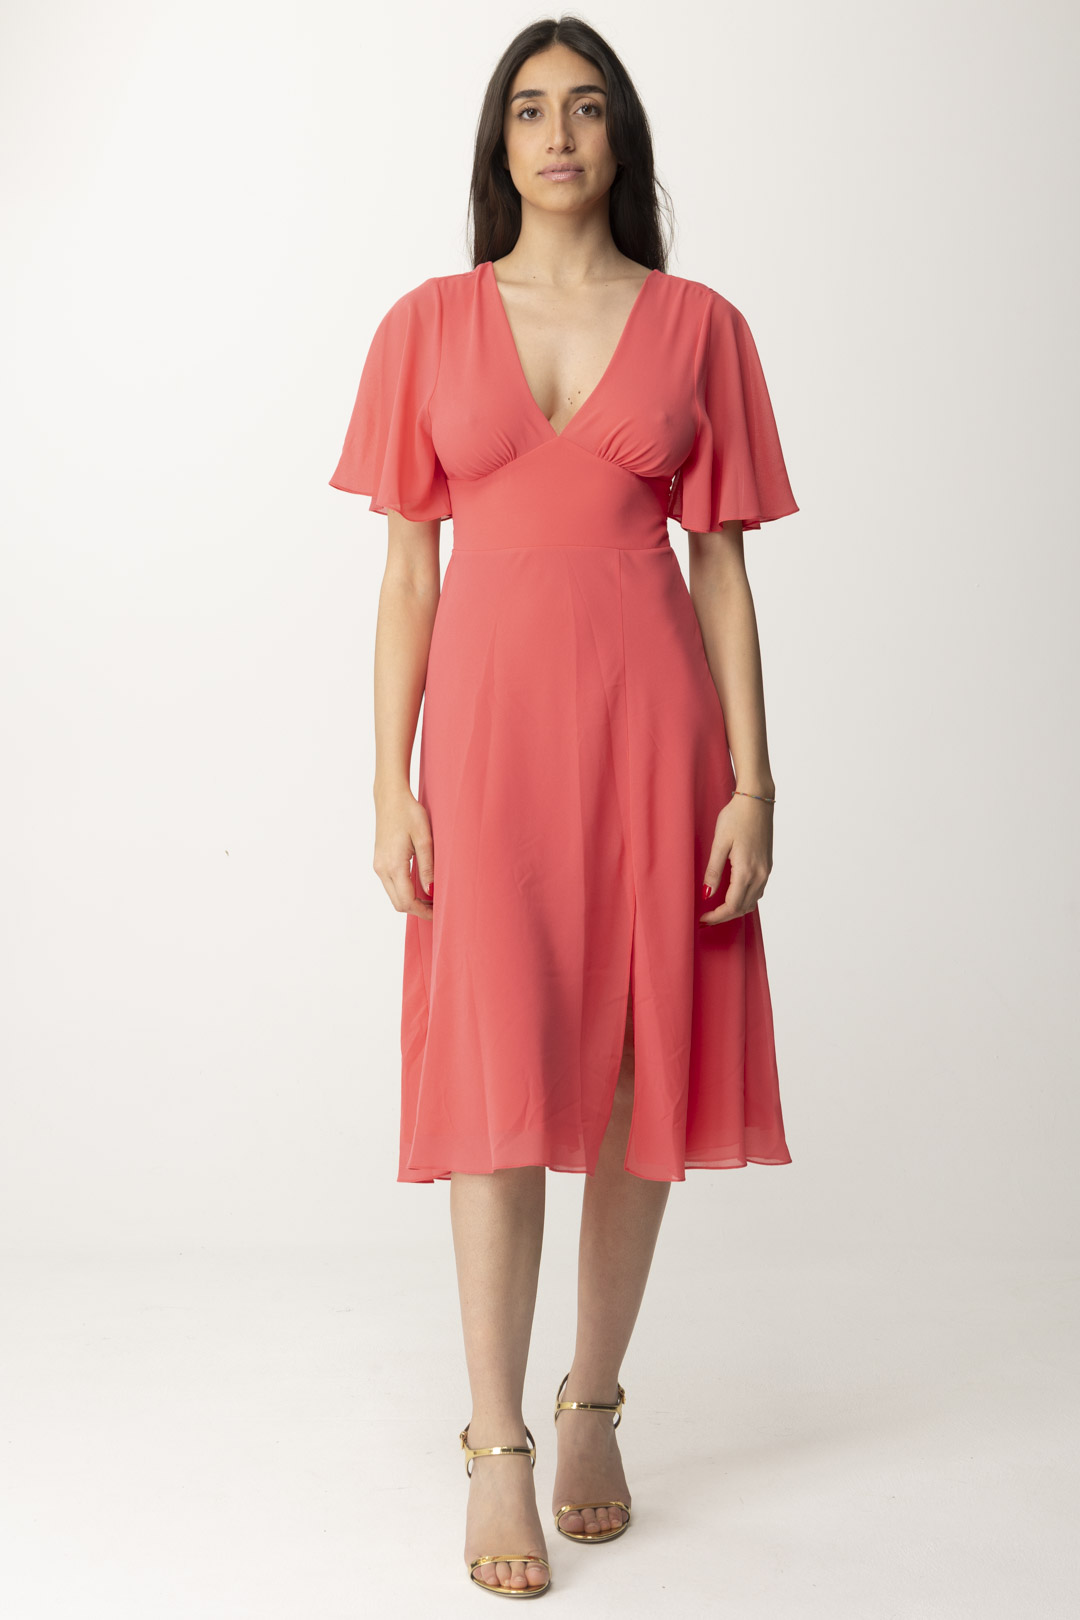 Preview: Patrizia Pepe Midi Dress with Jewel Detail at the Back HyBrid Rose